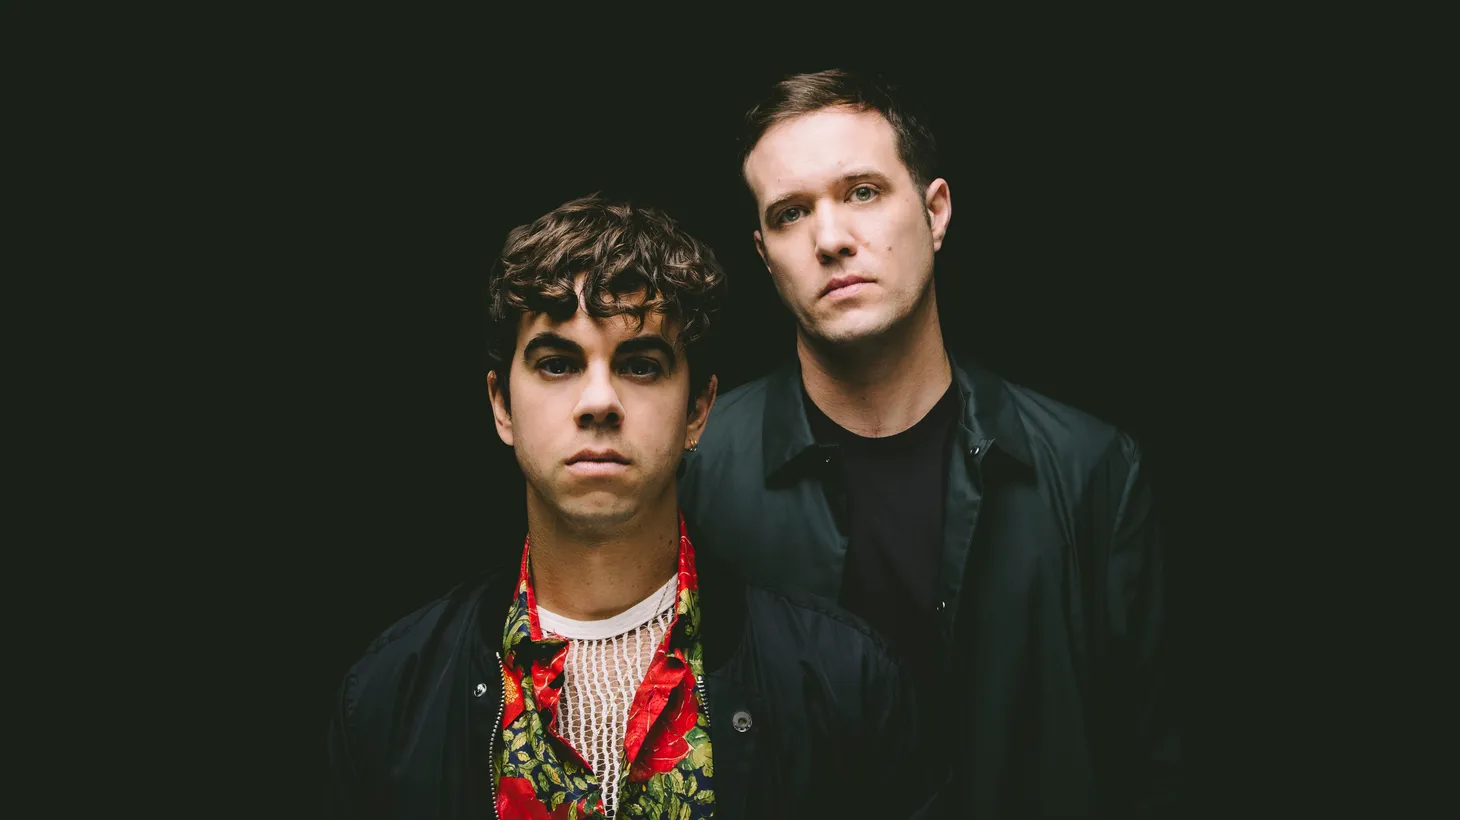 LA-based indie pop duo Electric Guest return with the long-awaited follow up to their 2012 debut.